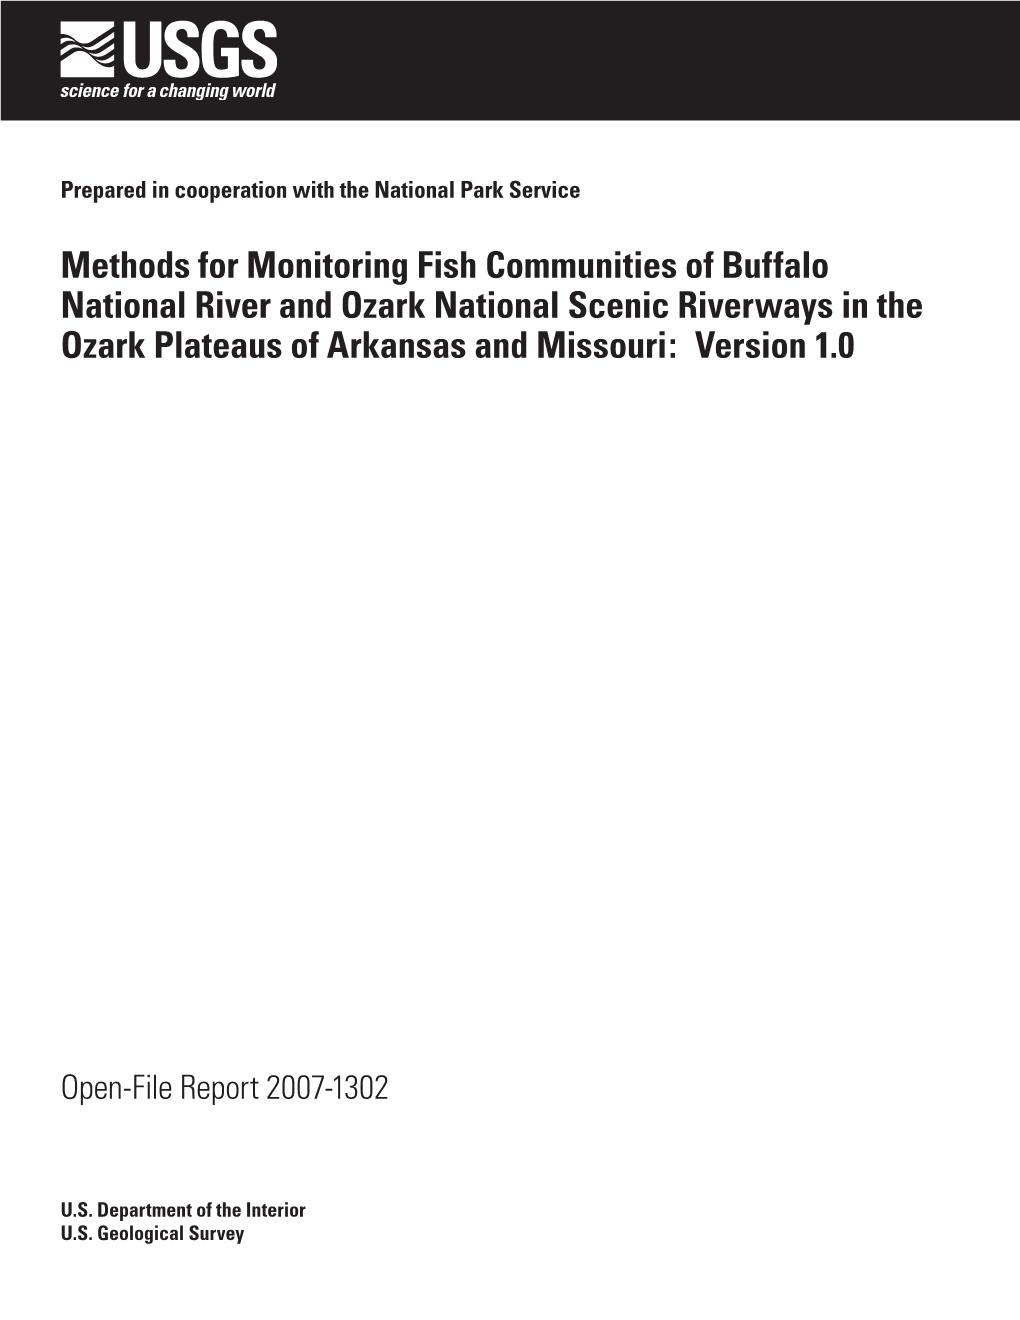 Methods for Monitoring Fish Communities of Buffalo National River and Ozark National Scenic Riverways in the Ozark Plateaus of Arkansas and Missouri: Version 1.0